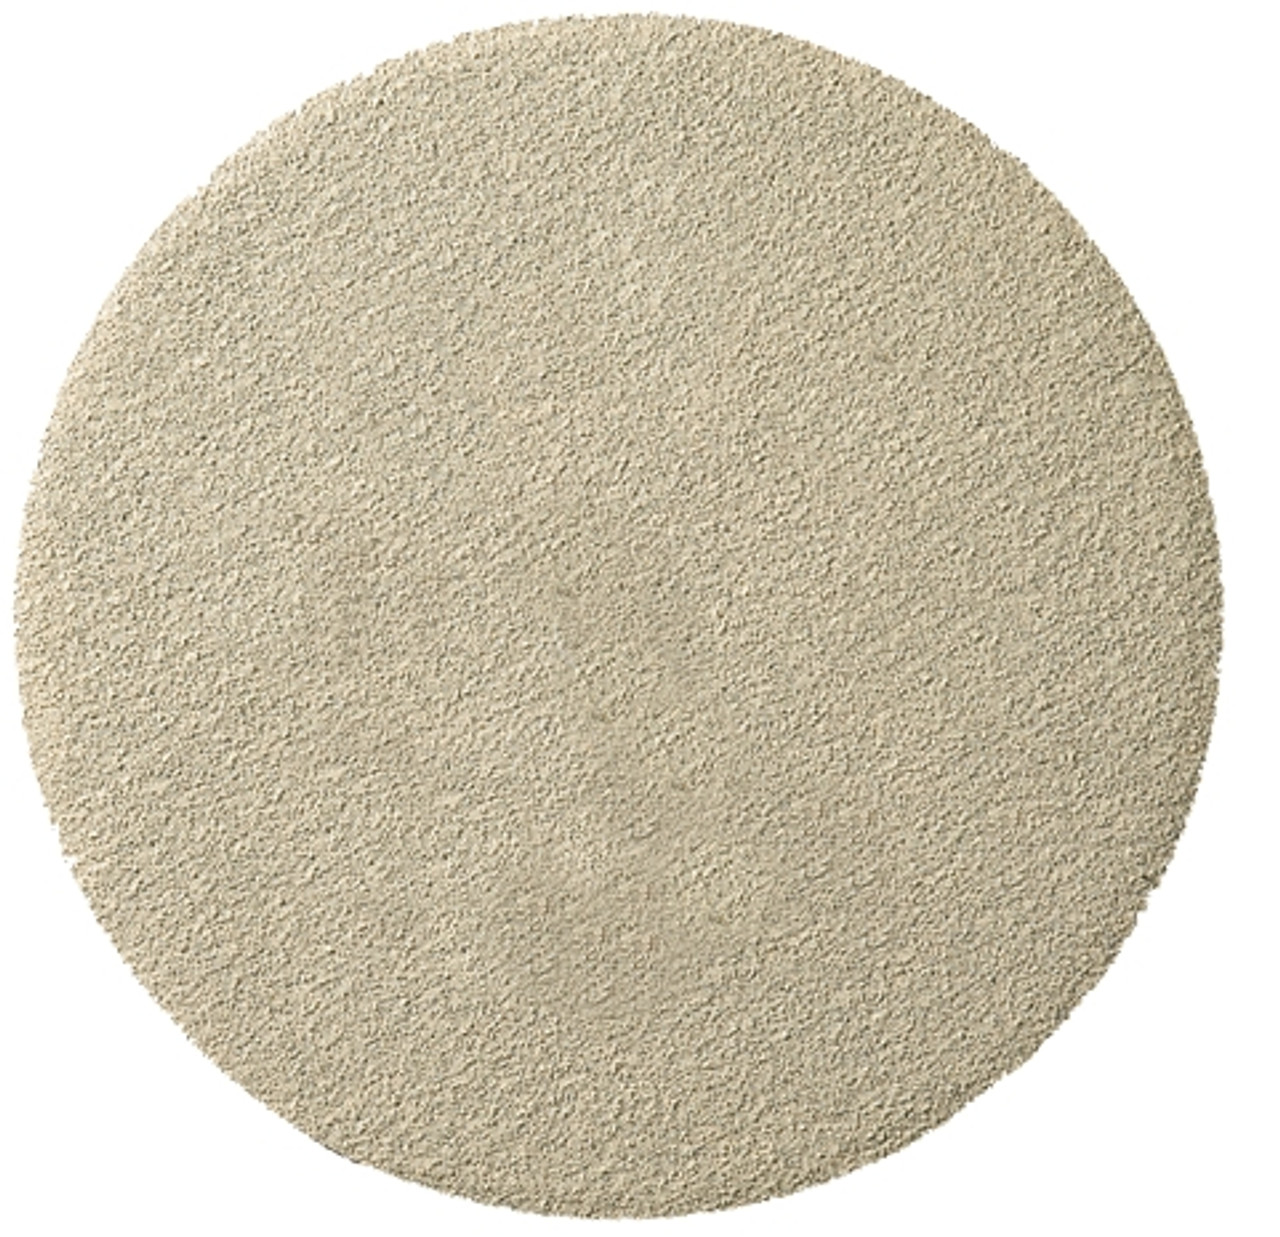 Self Fastening Disc - (Ps33) Paper/Aluminium Oxide/No Hole 40Grit 150Mm